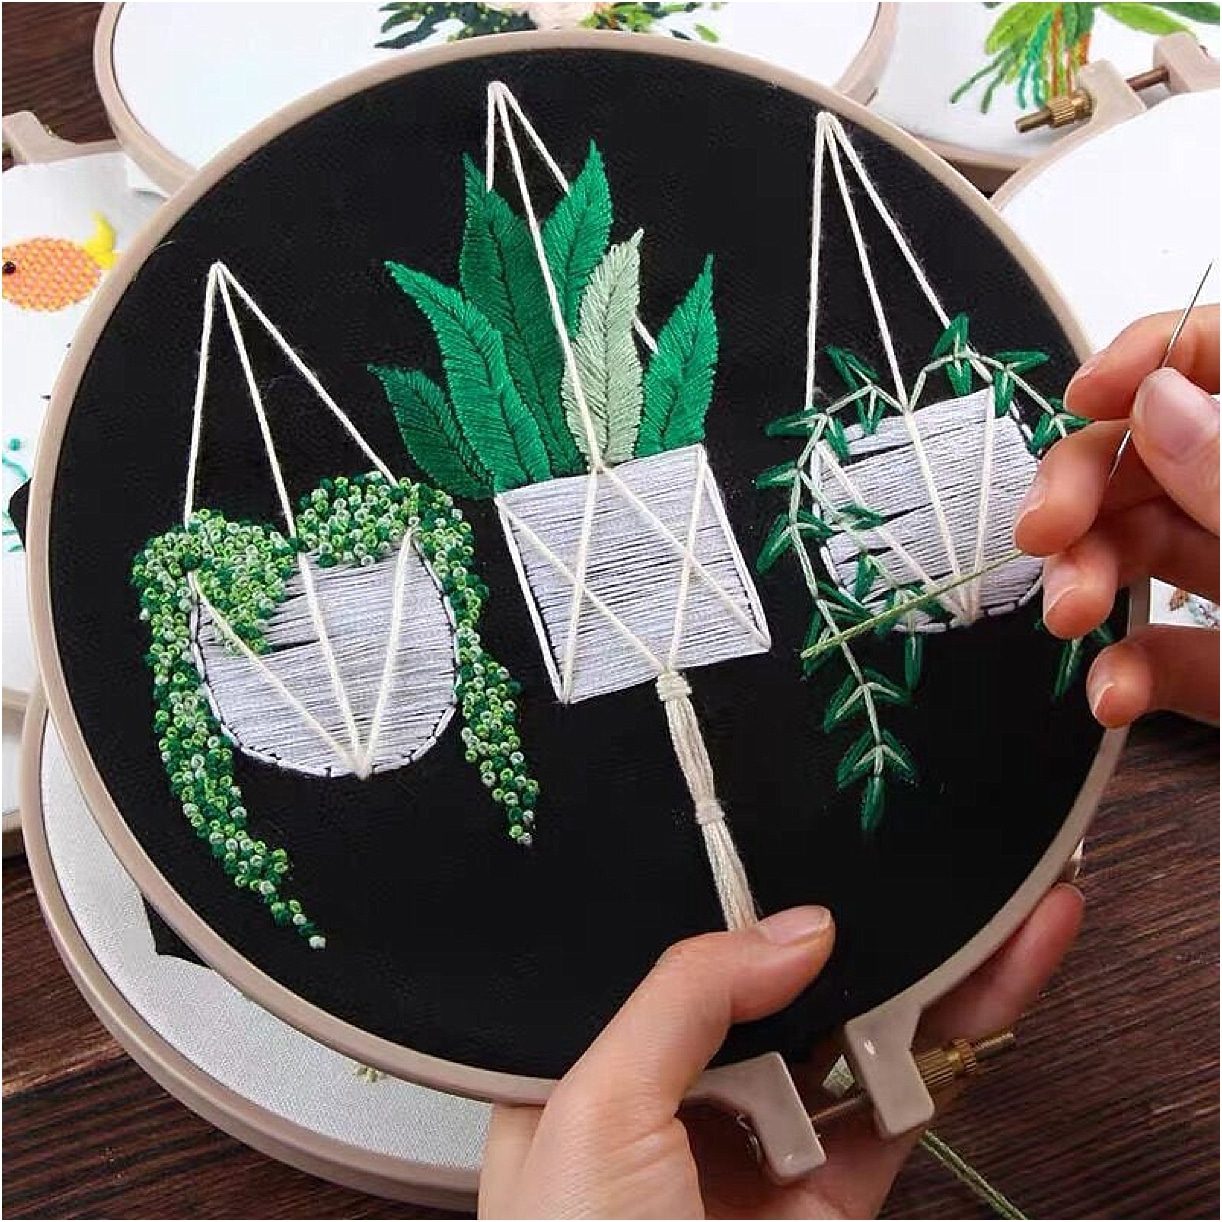 12 DIY Embroidery Designs for Your New Home | Hill City Bride Virginia Weddings Succulents